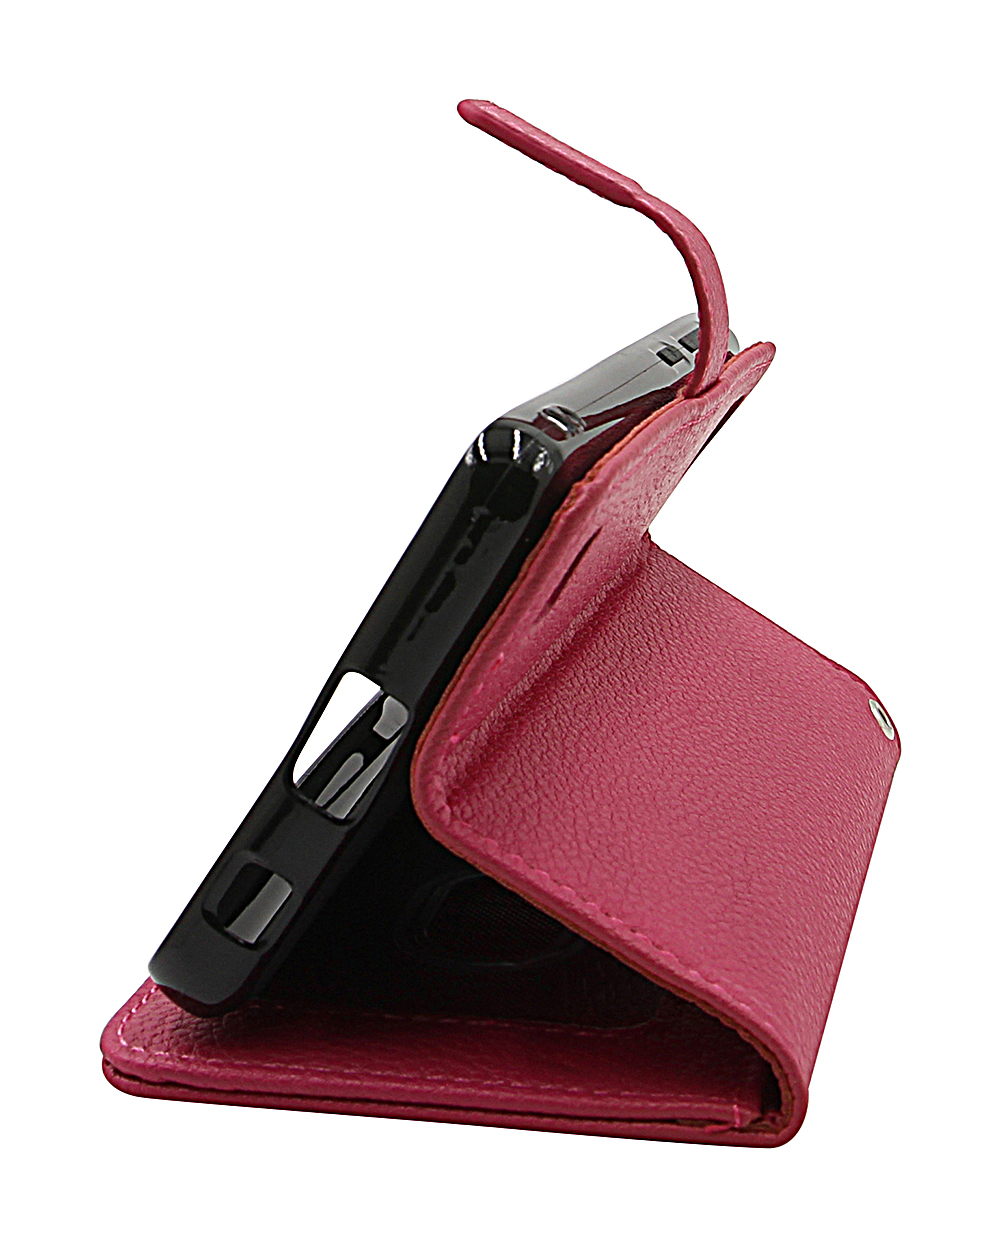 New Standcase Wallet Sony Xperia 1 IV (XQ-CT54)